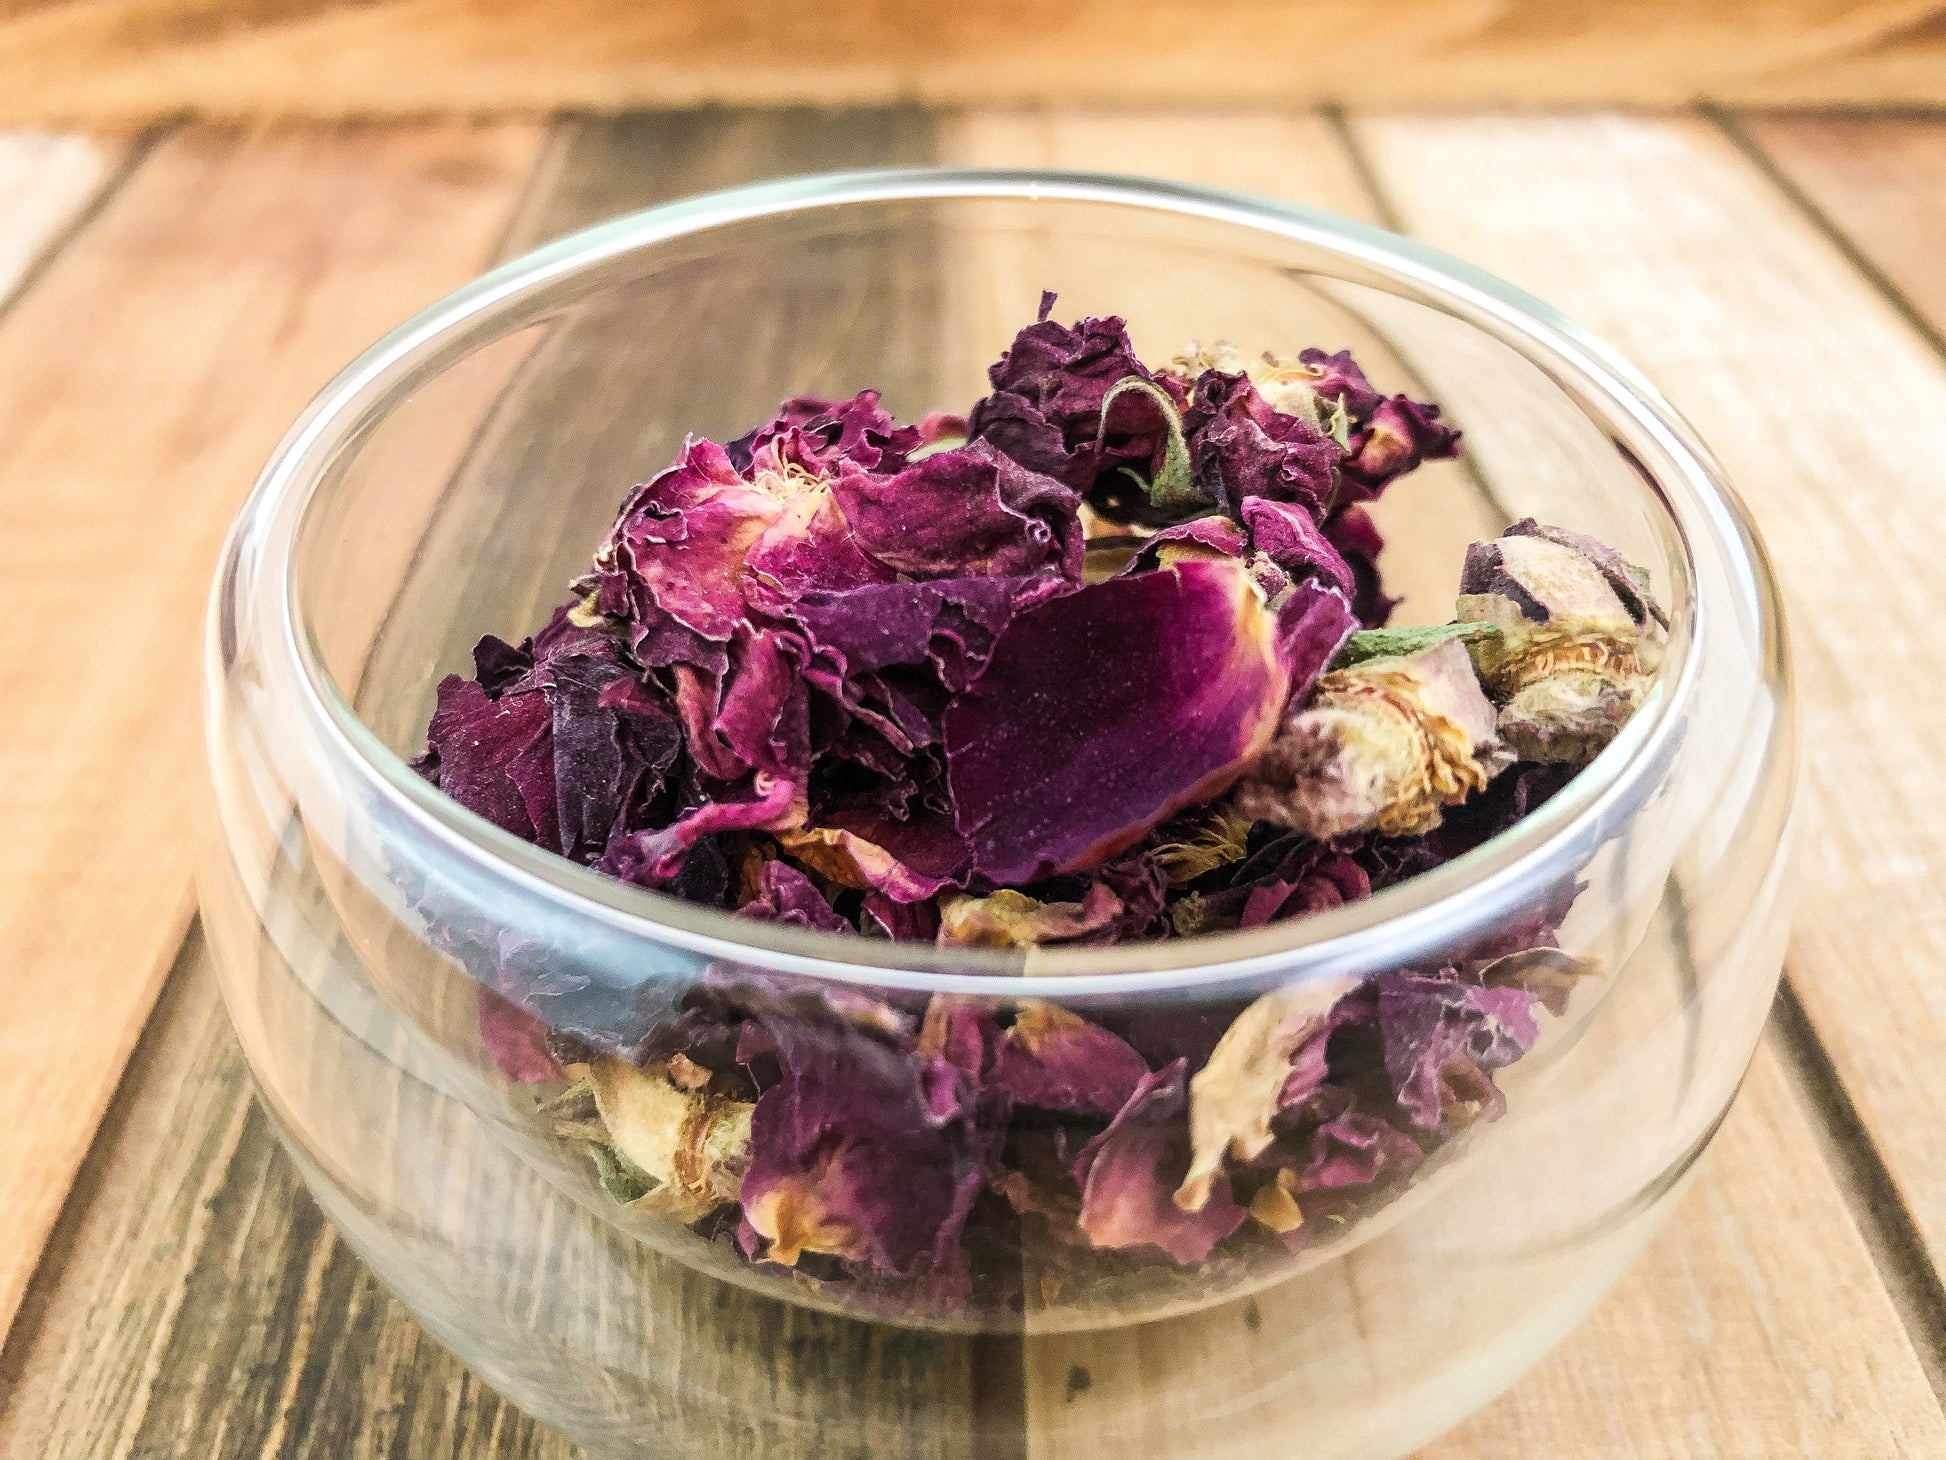 upclose image of dried roses in a small clear glass cup on a wooden table top as background